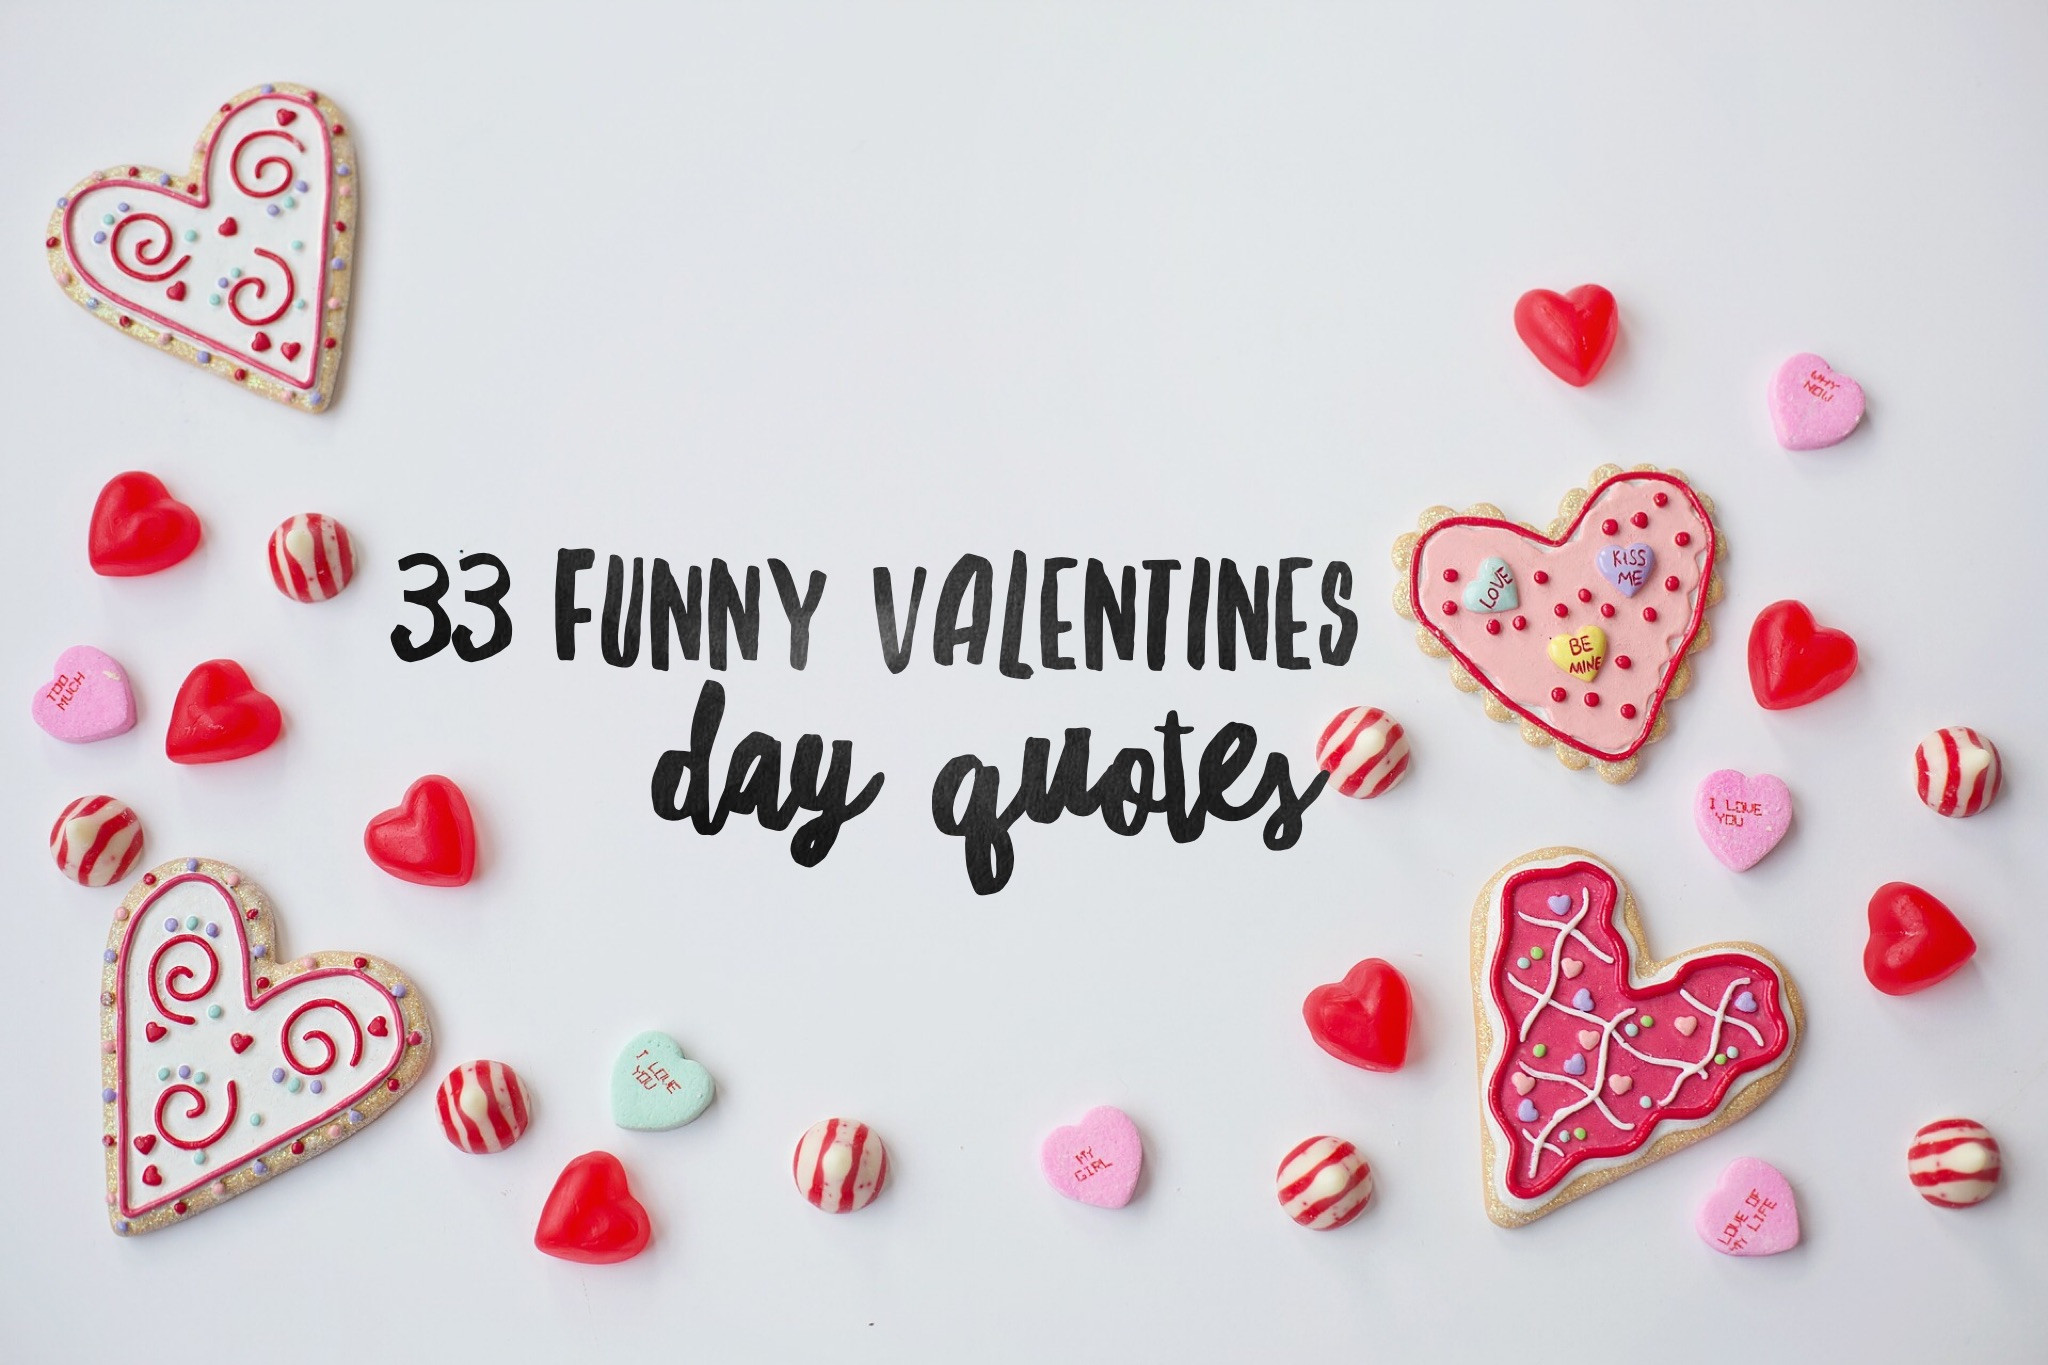 Valentines Day Quote
 33 Funny Valentines Day Quotes